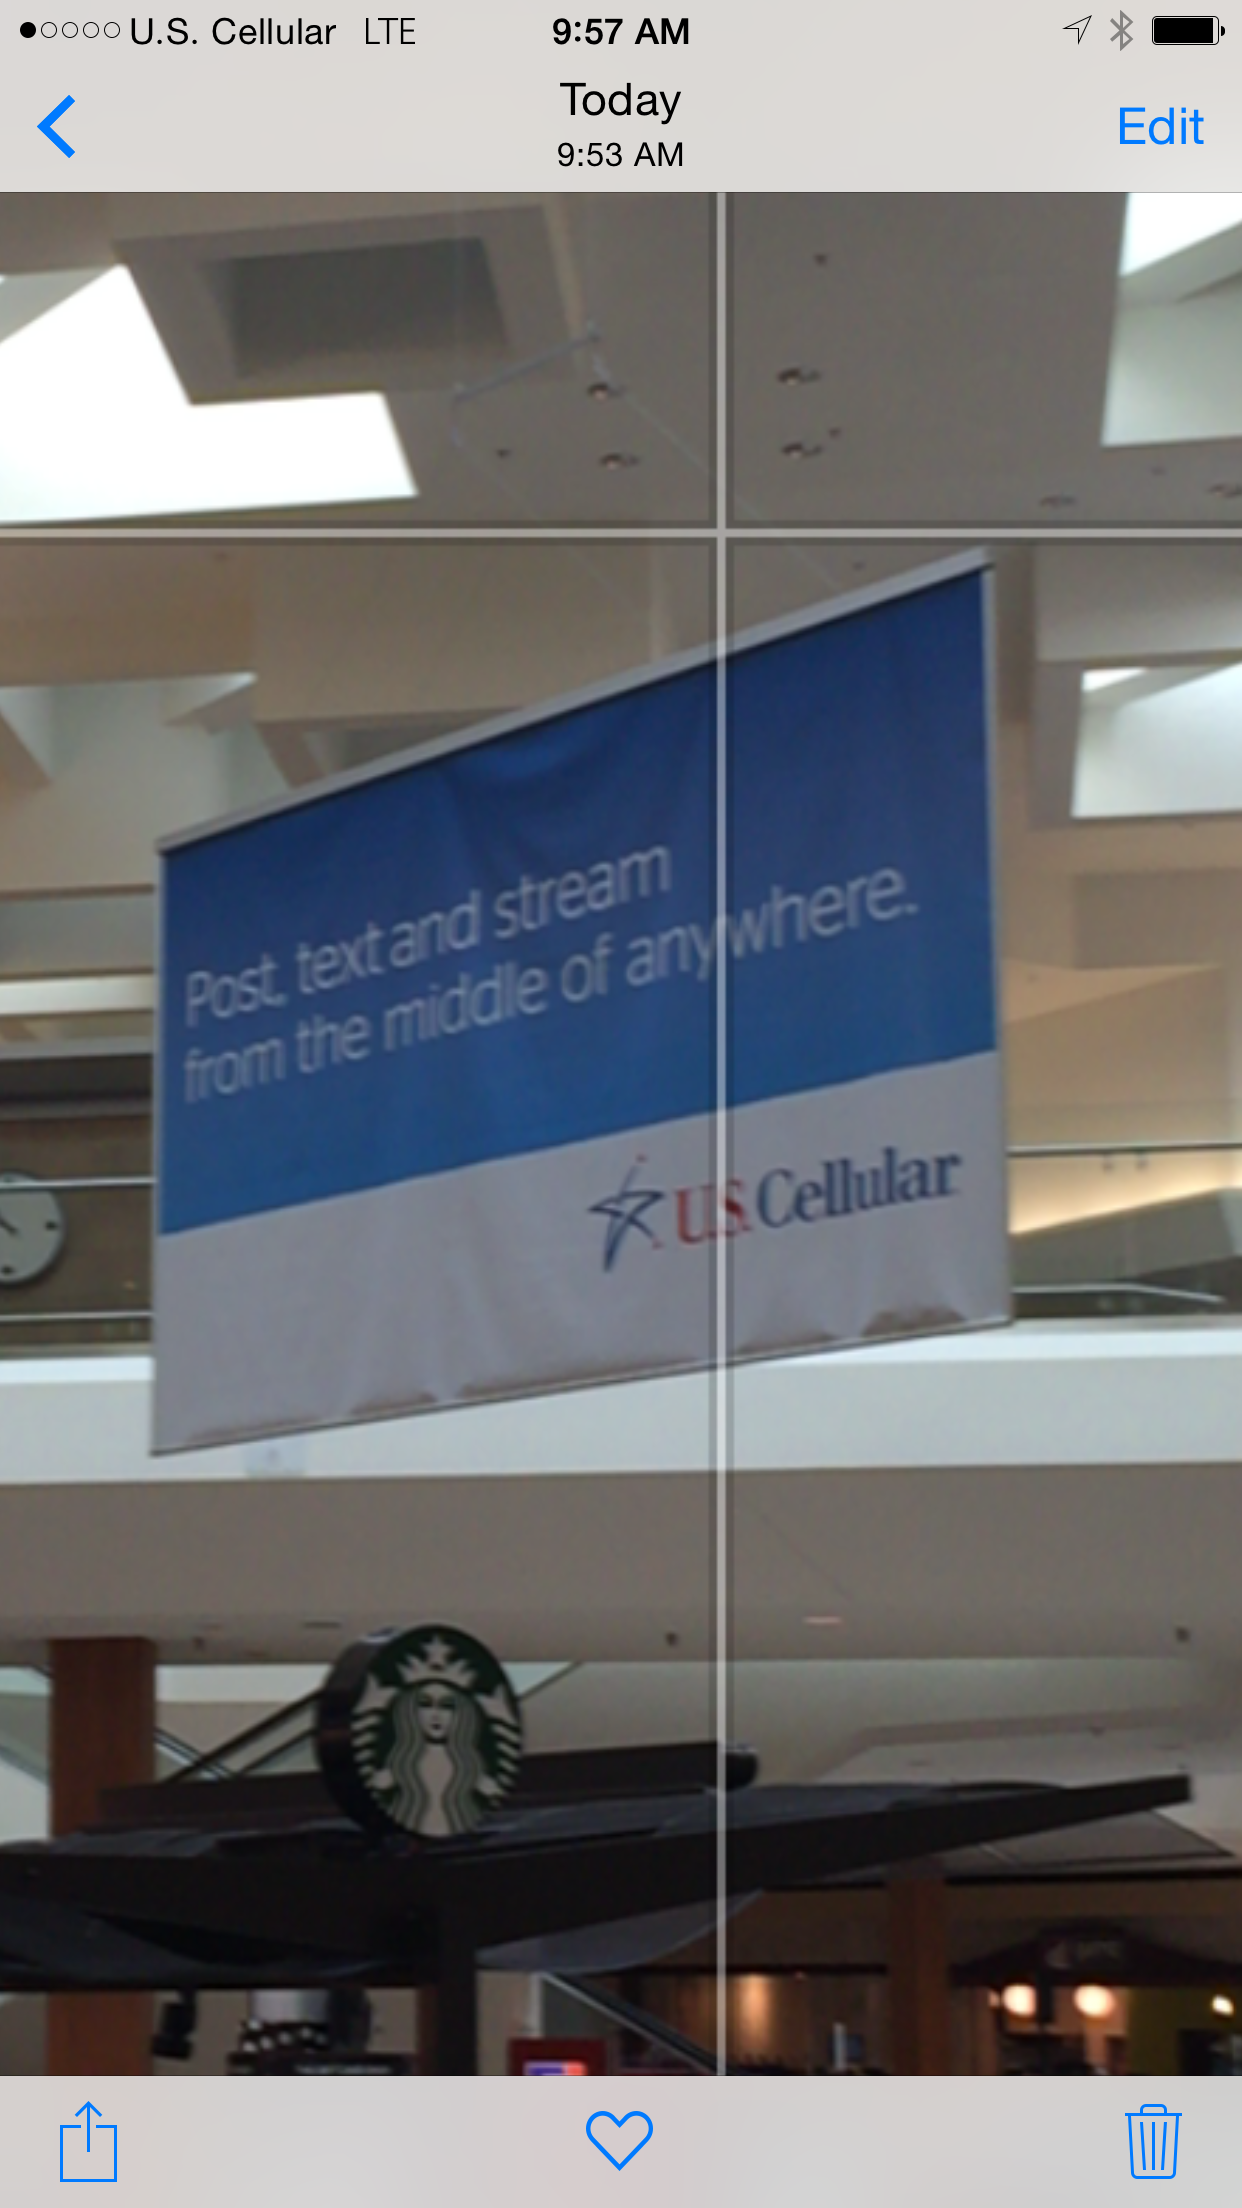 US Cellular banner hanging inside of a mall with overlaid iOS interface showing a poor signal and US Cellular carrier name